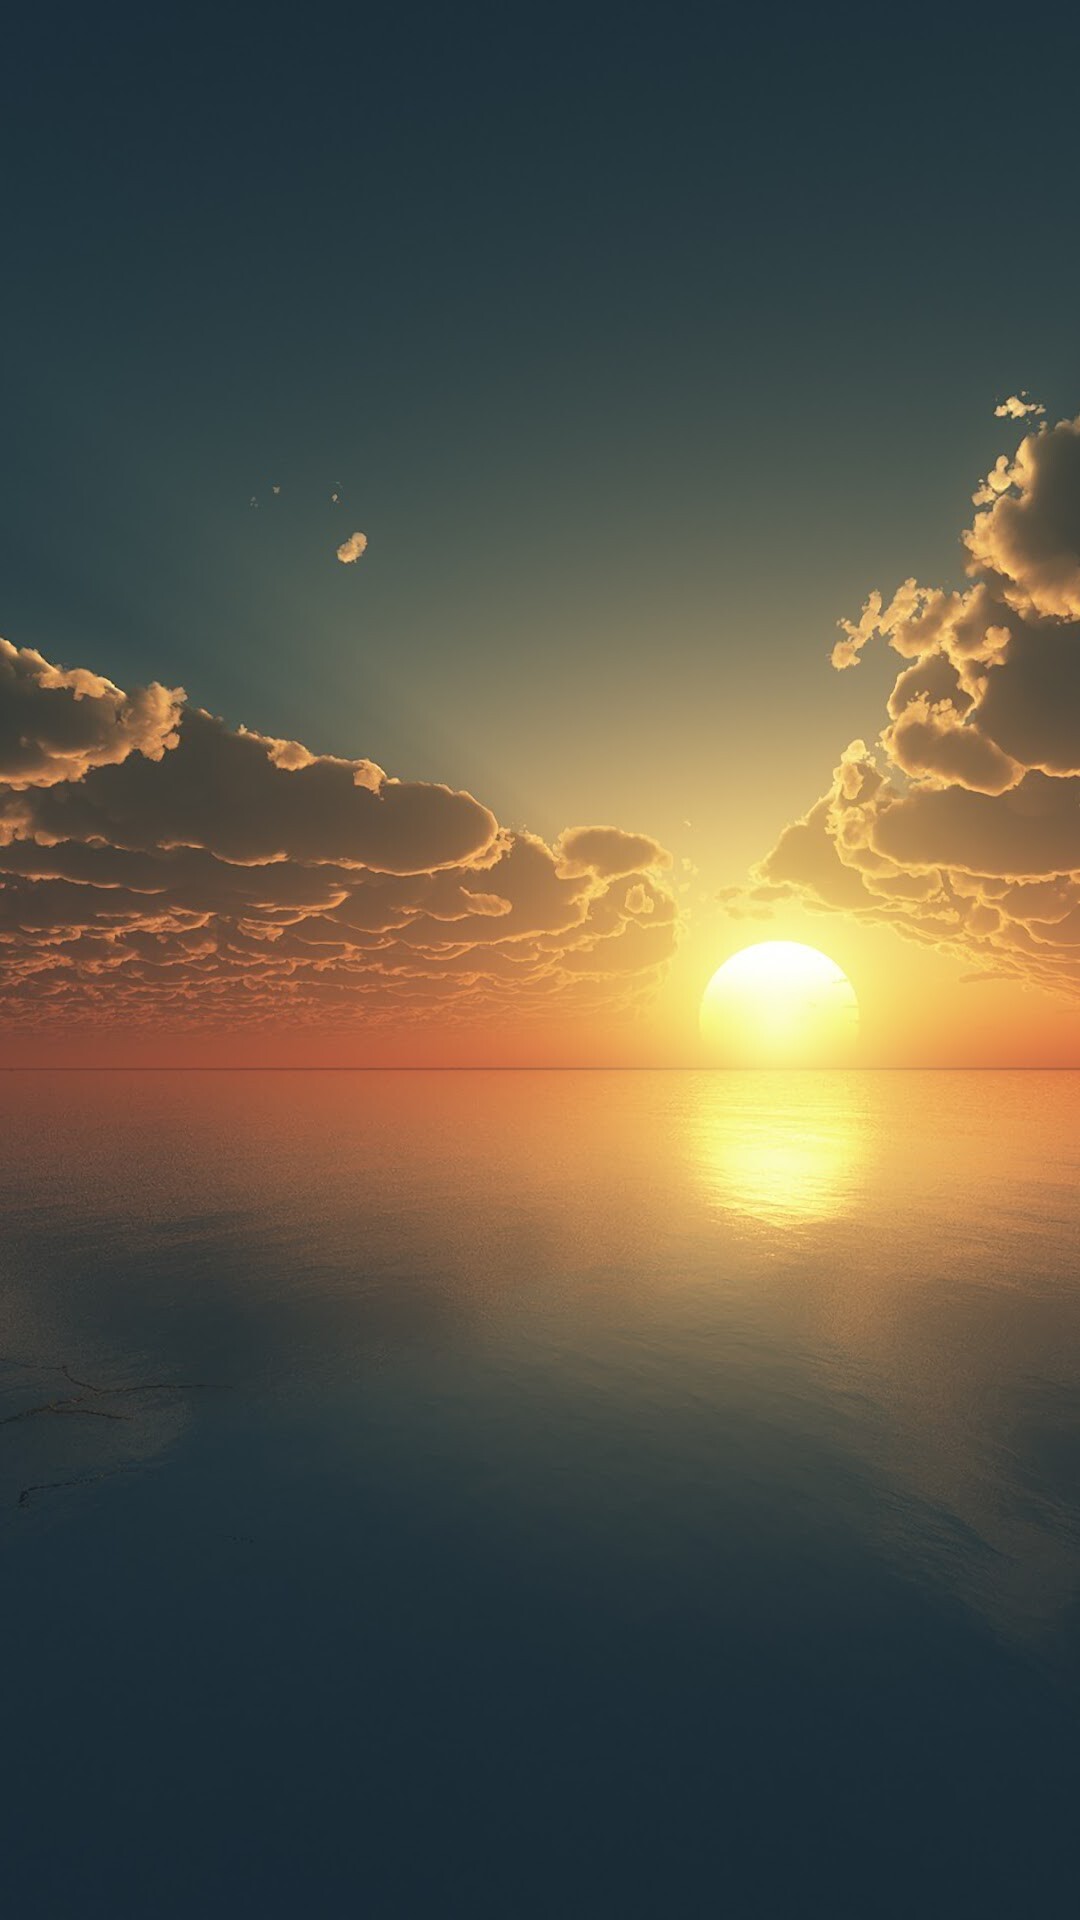 Sunrise: The sun's disc first breaks the plane of the horizon, The broad expanse of water reflecting clouds. 1080x1920 Full HD Wallpaper.